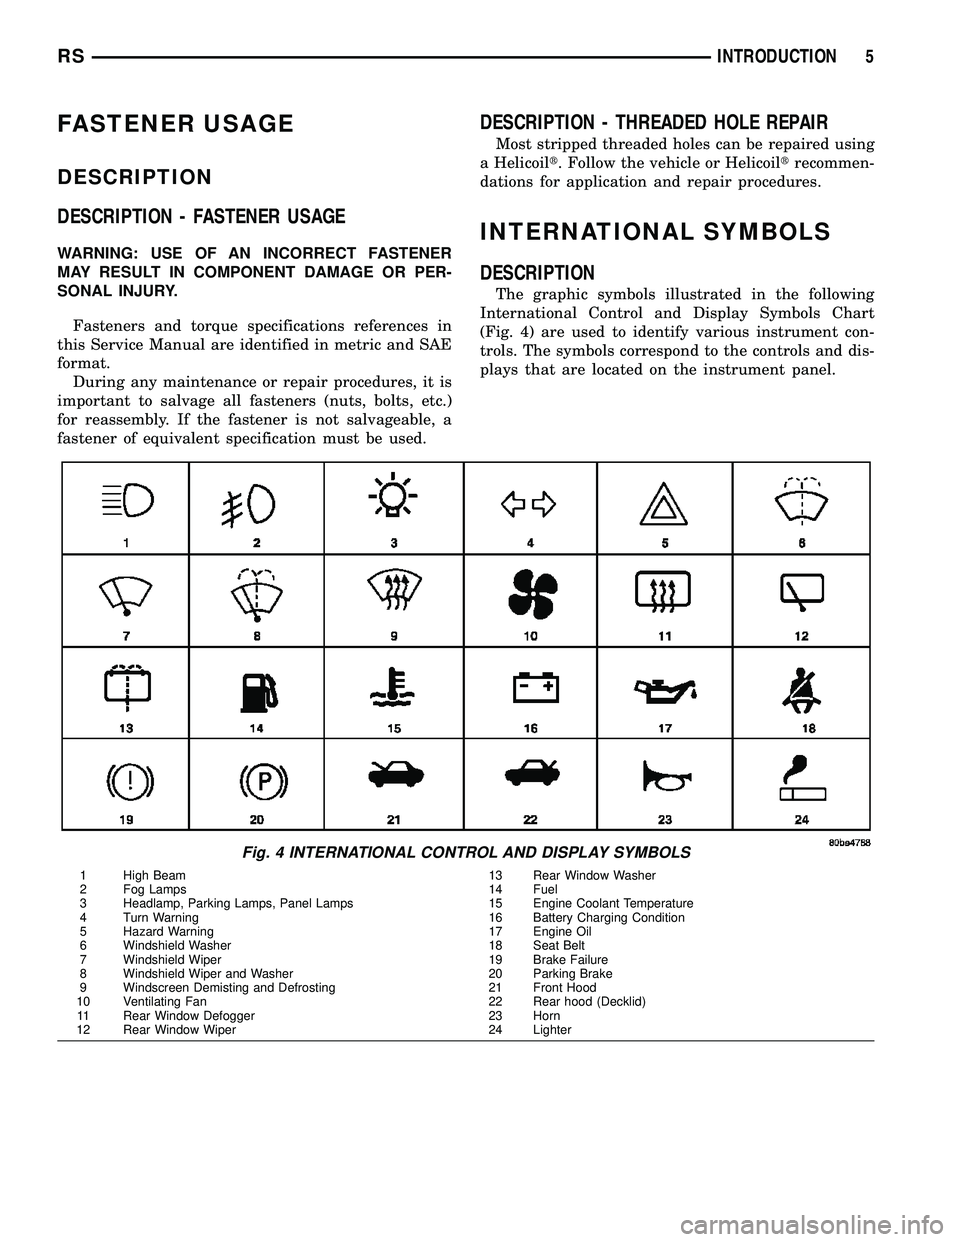 CHRYSLER VOYAGER 2004  Service Manual FASTENER USAGE
DESCRIPTION
DESCRIPTION - FASTENER USAGE
WARNING: USE OF AN INCORRECT FASTENER
MAY RESULT IN COMPONENT DAMAGE OR PER-
SONAL INJURY.
Fasteners and torque specifications references in
thi